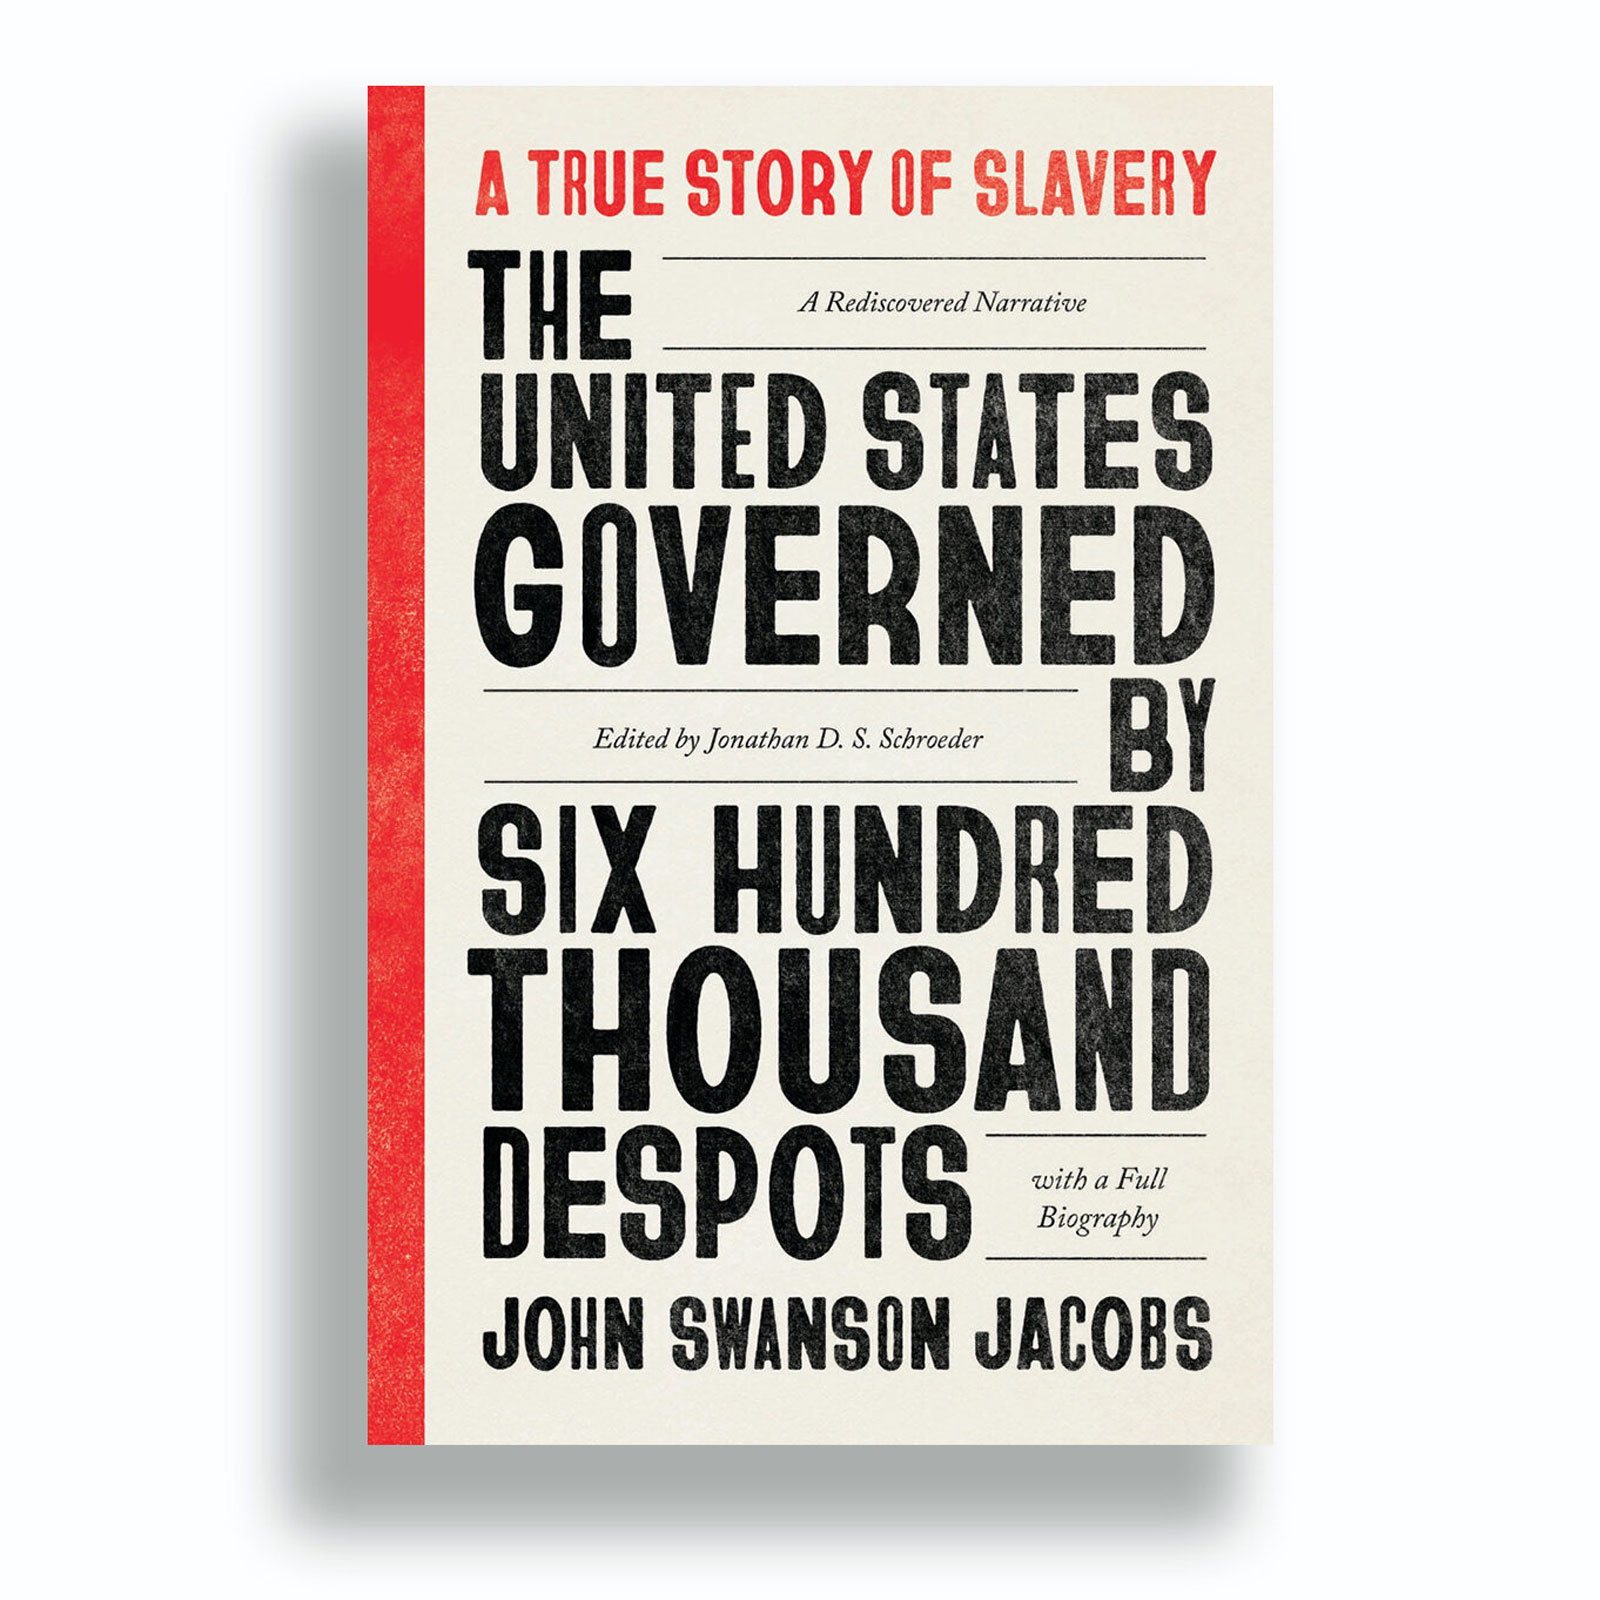 Scholars say that the narrative, published outside the network of white abolitionist gatekeepers, is unique for its global perspective and its unflinching indictment of the United States.